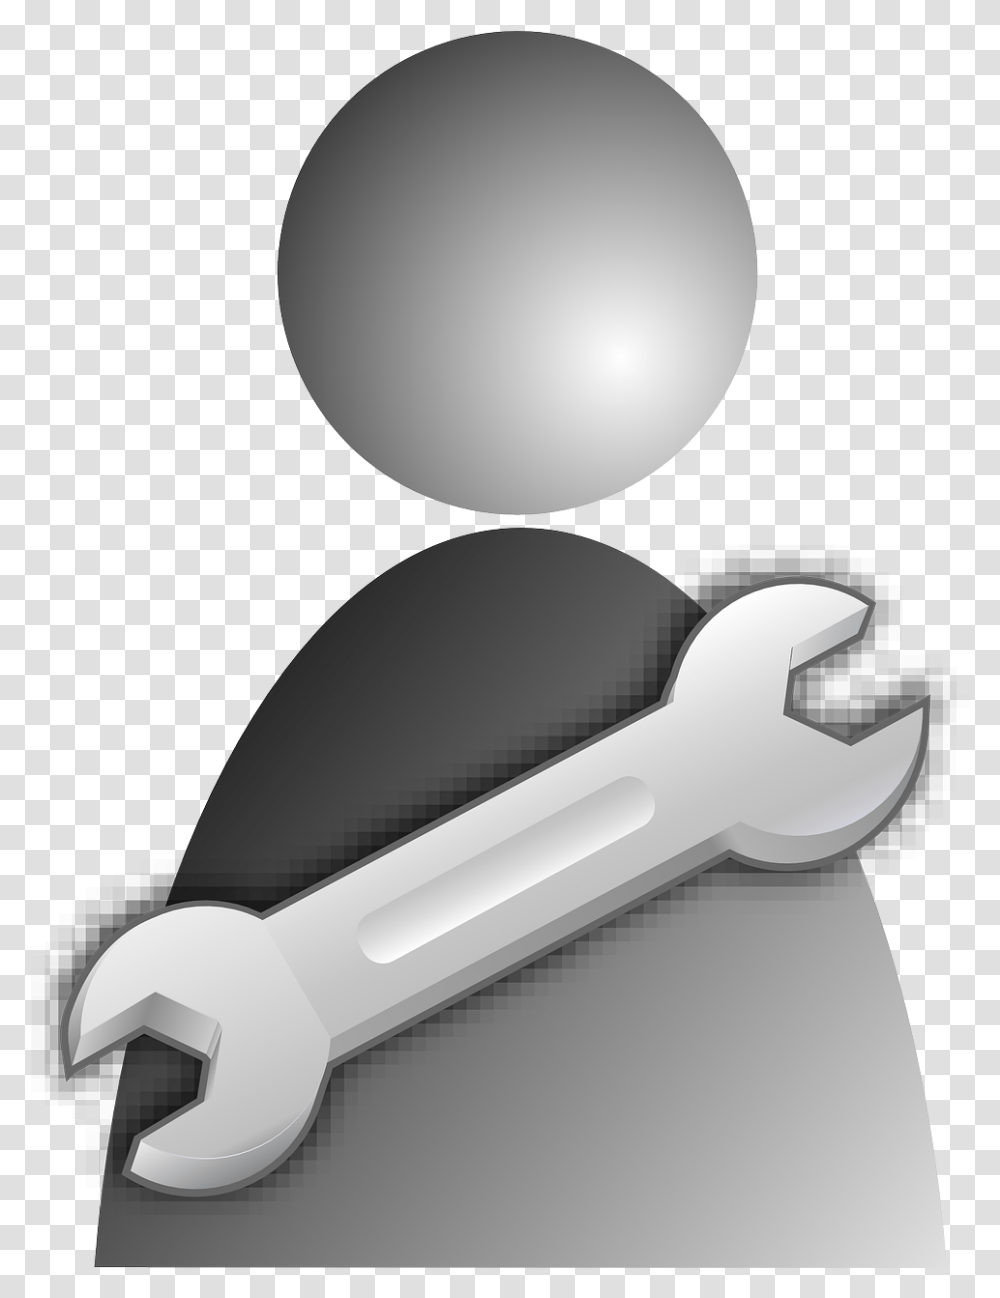 Wrench, Sink Faucet, Electronics, Moon Transparent Png